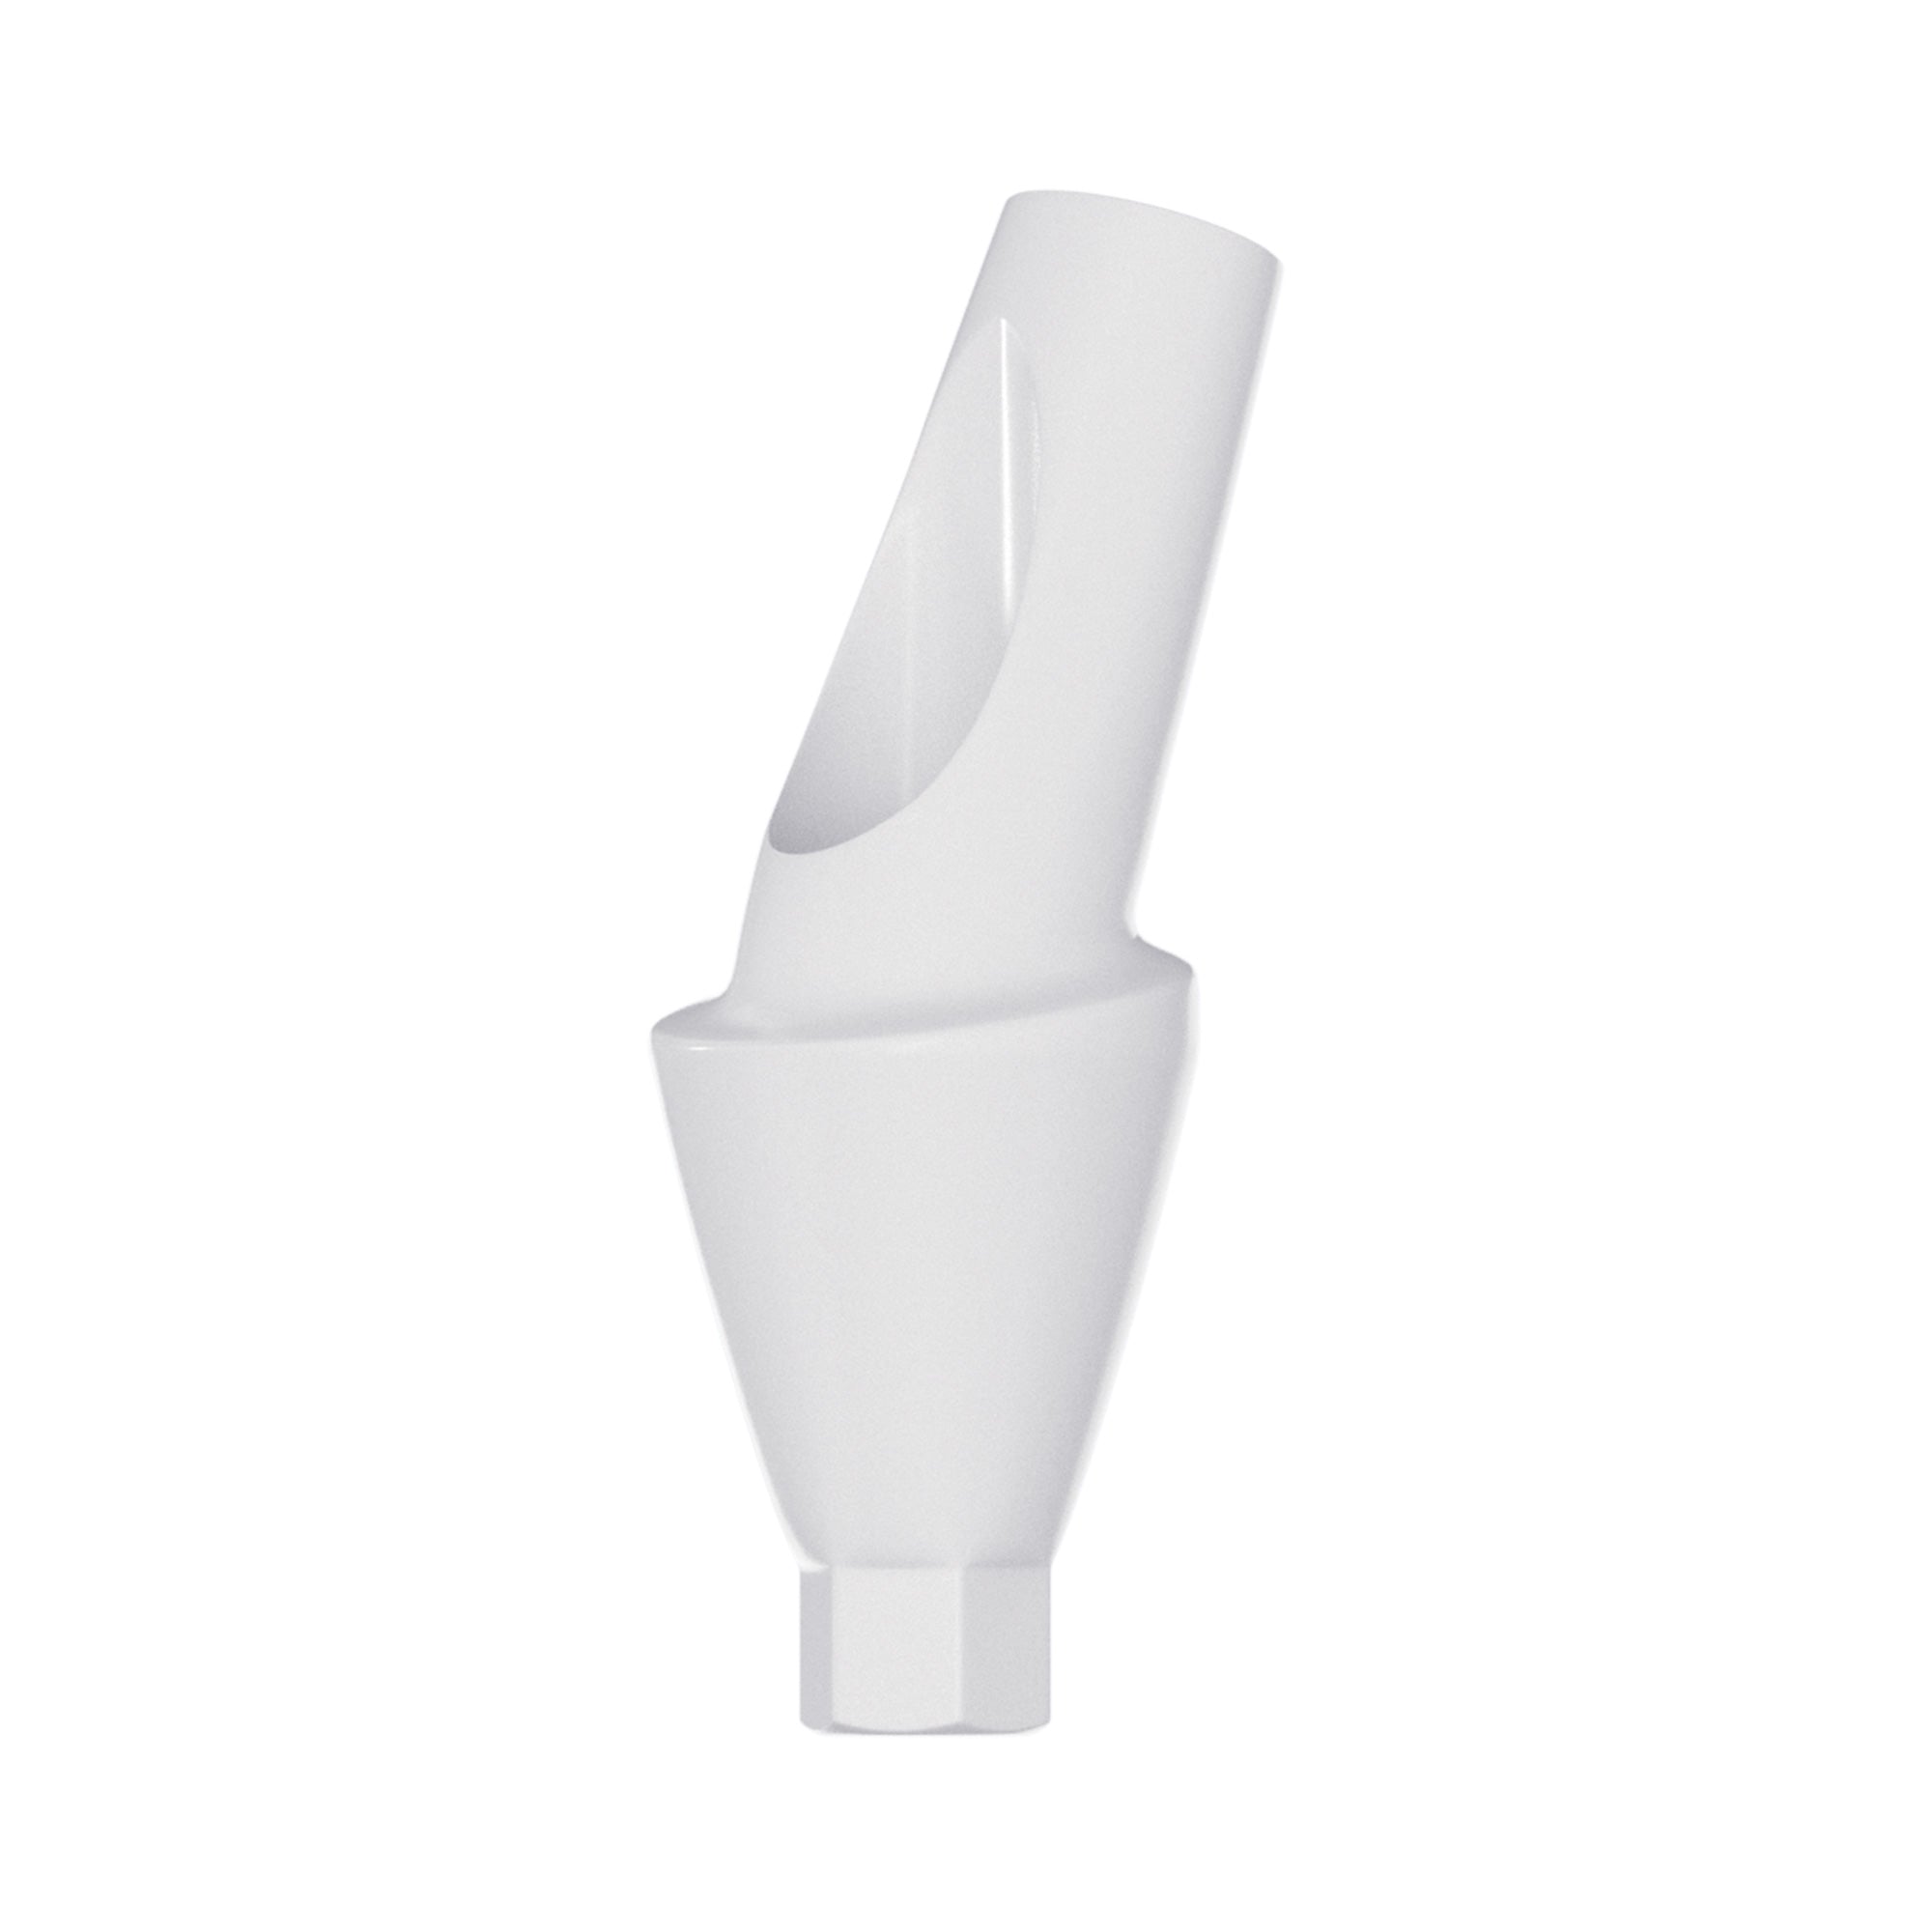 DSI Temporary Angulated 15° PEEK Abutment 3.6mm - Conical Connection NP Ø3.5mm